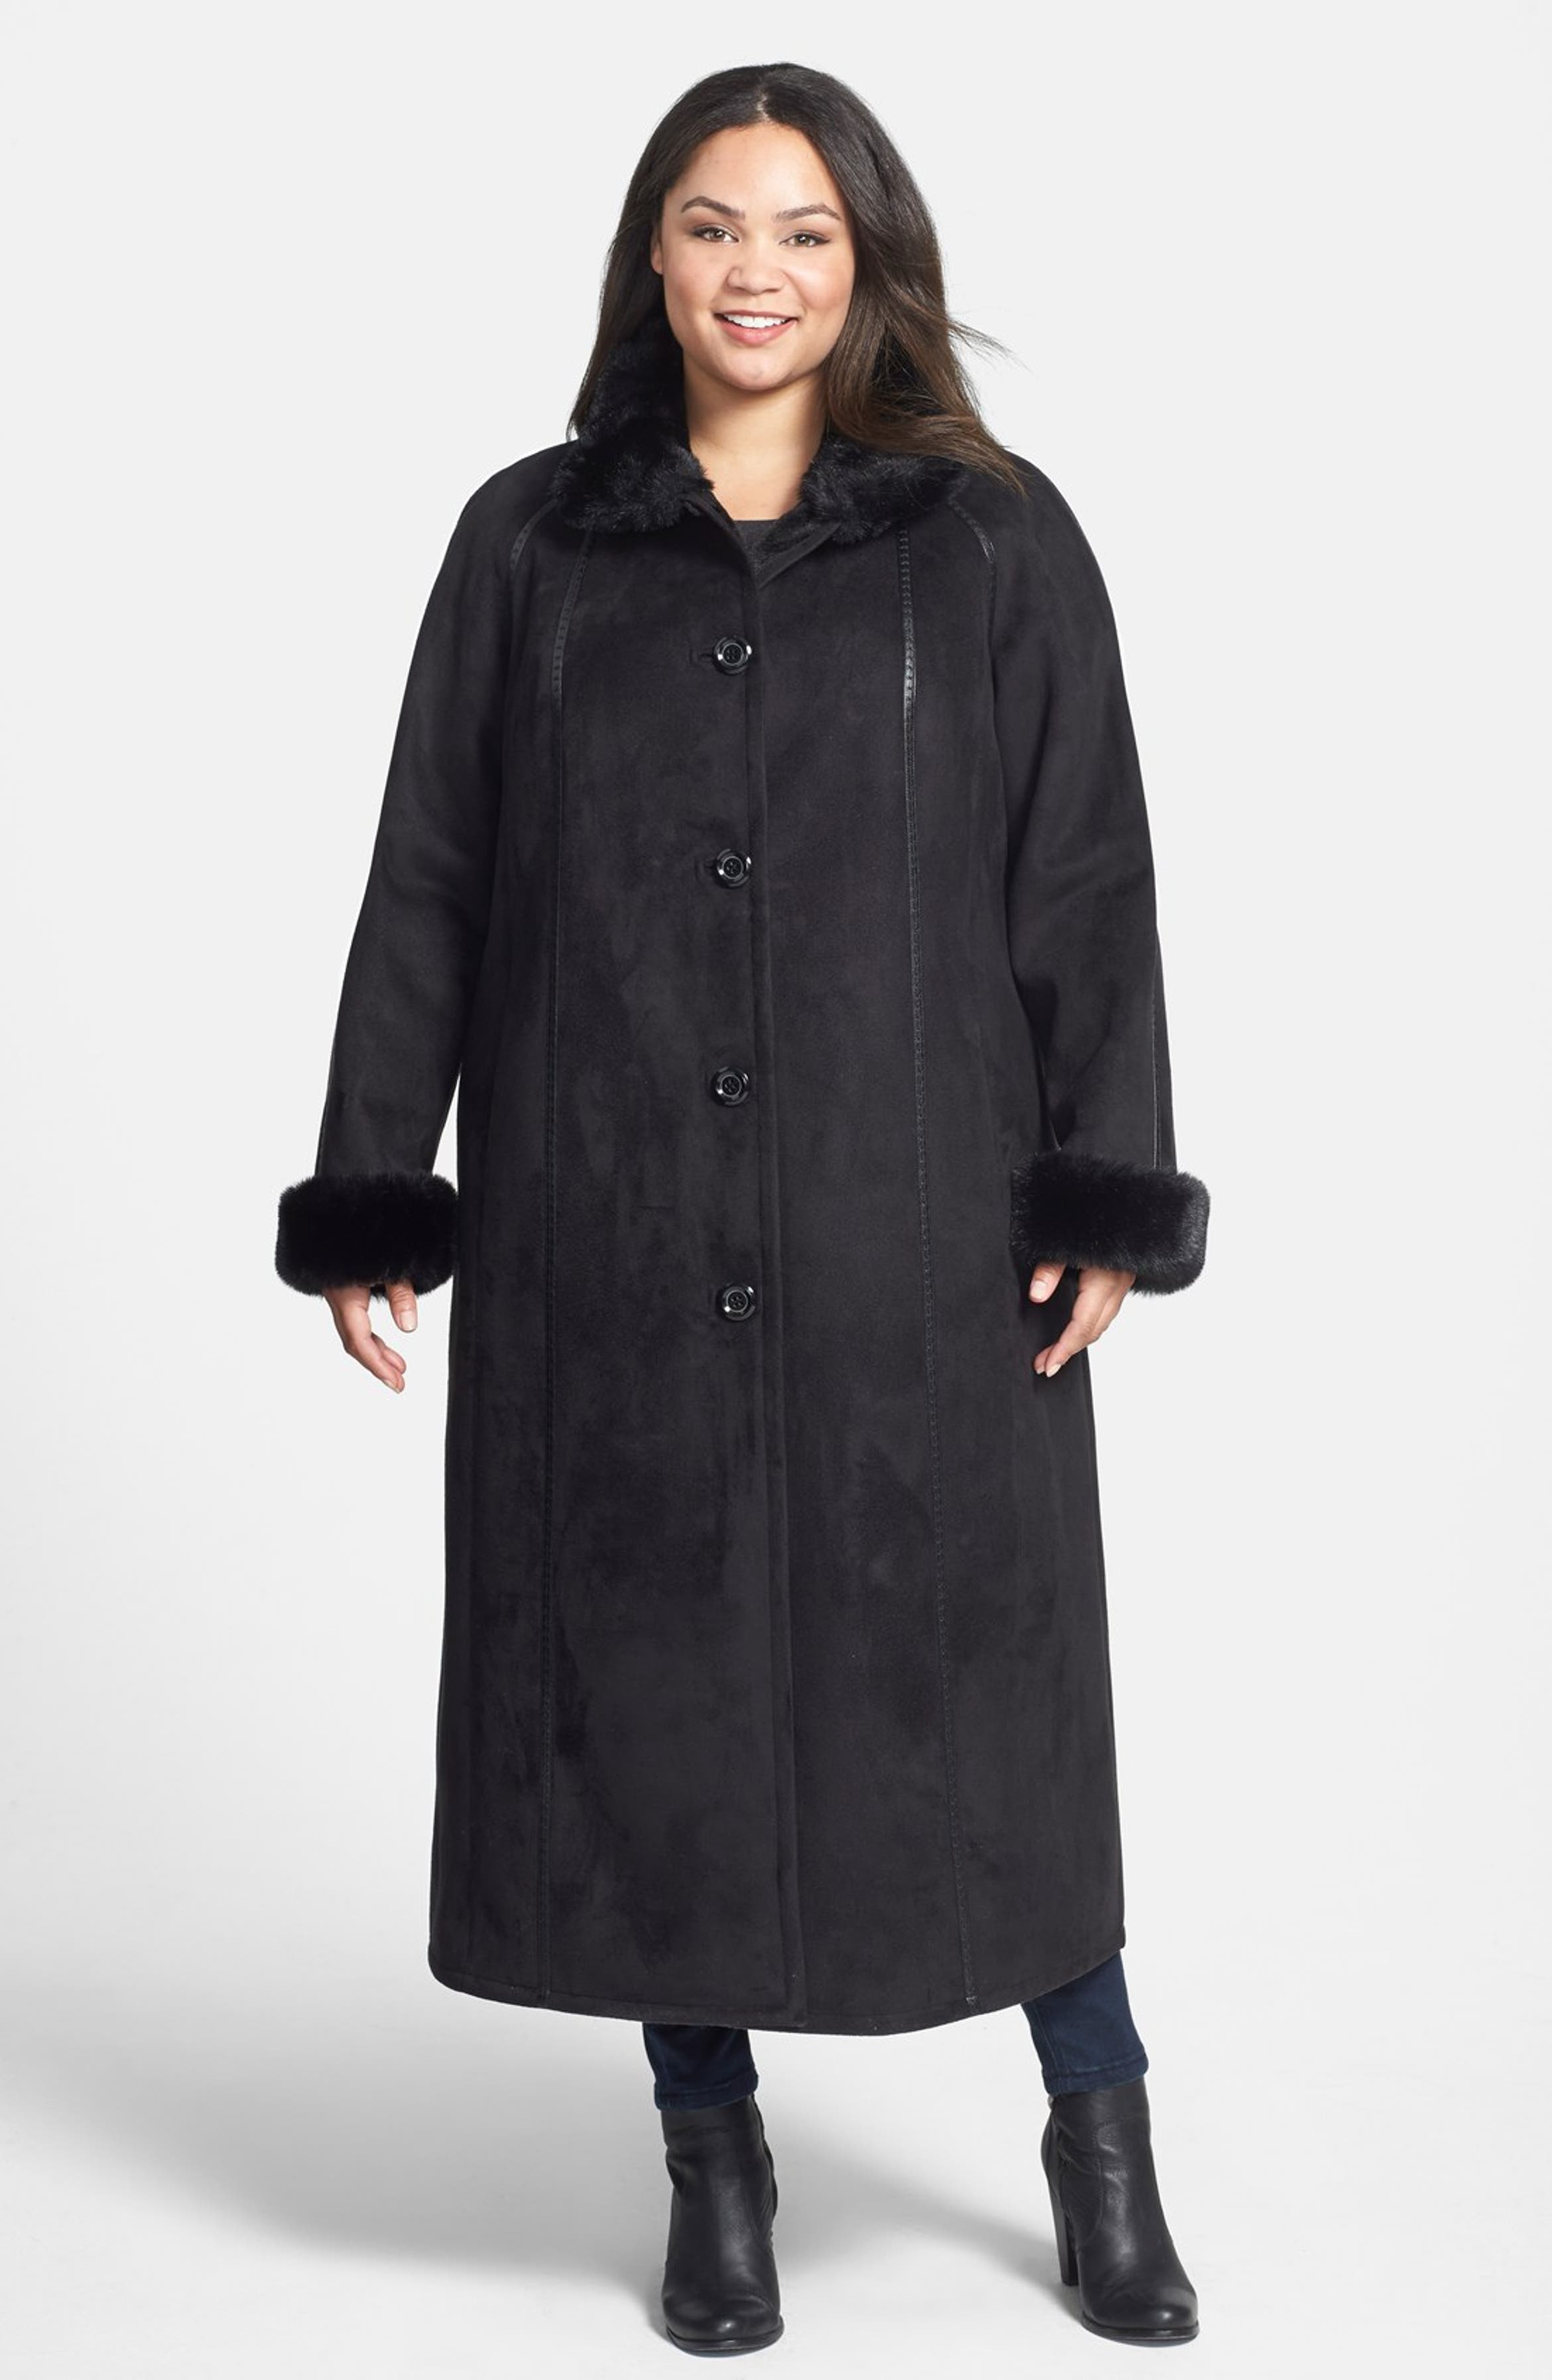 Gallery Long Faux Shearling Coat (Plus Size) | Nordstrom